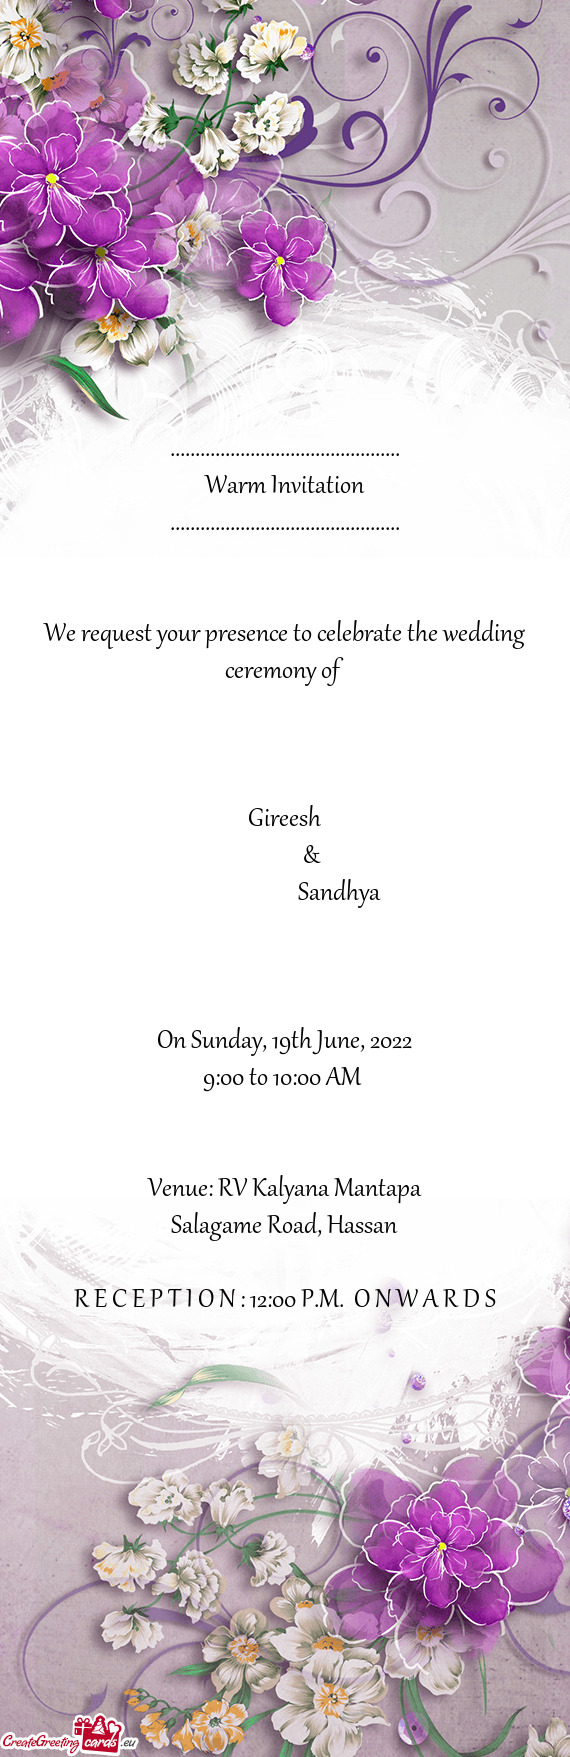 We request your presence to celebrate the wedding ceremony of